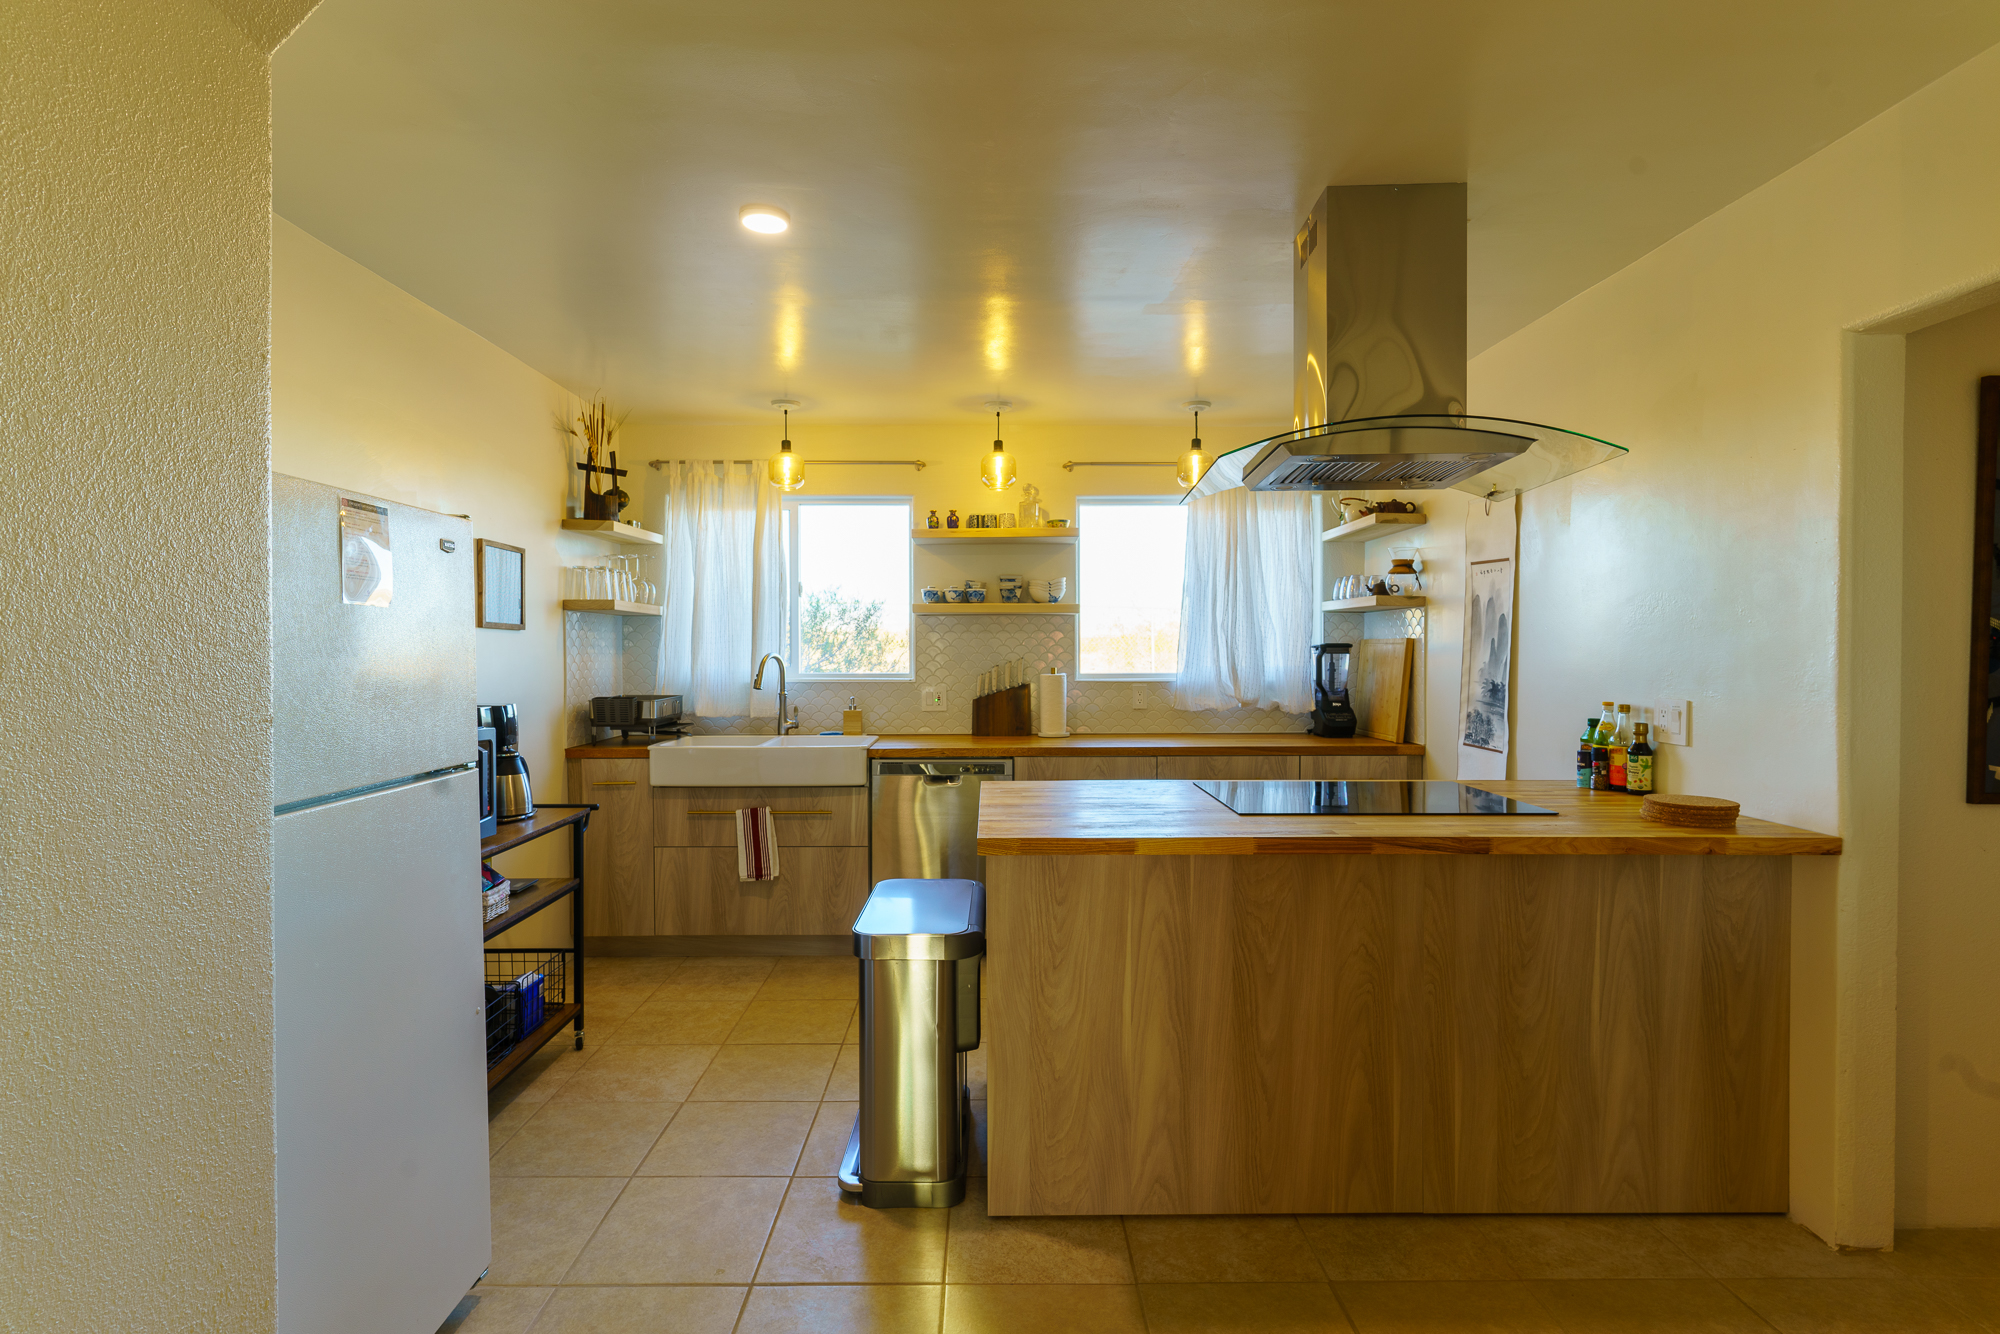 A medium sized kitchen with sink, dishwasher, blender, coffee pot, microwave, trash can, stove oven, and plenty of dish ware.